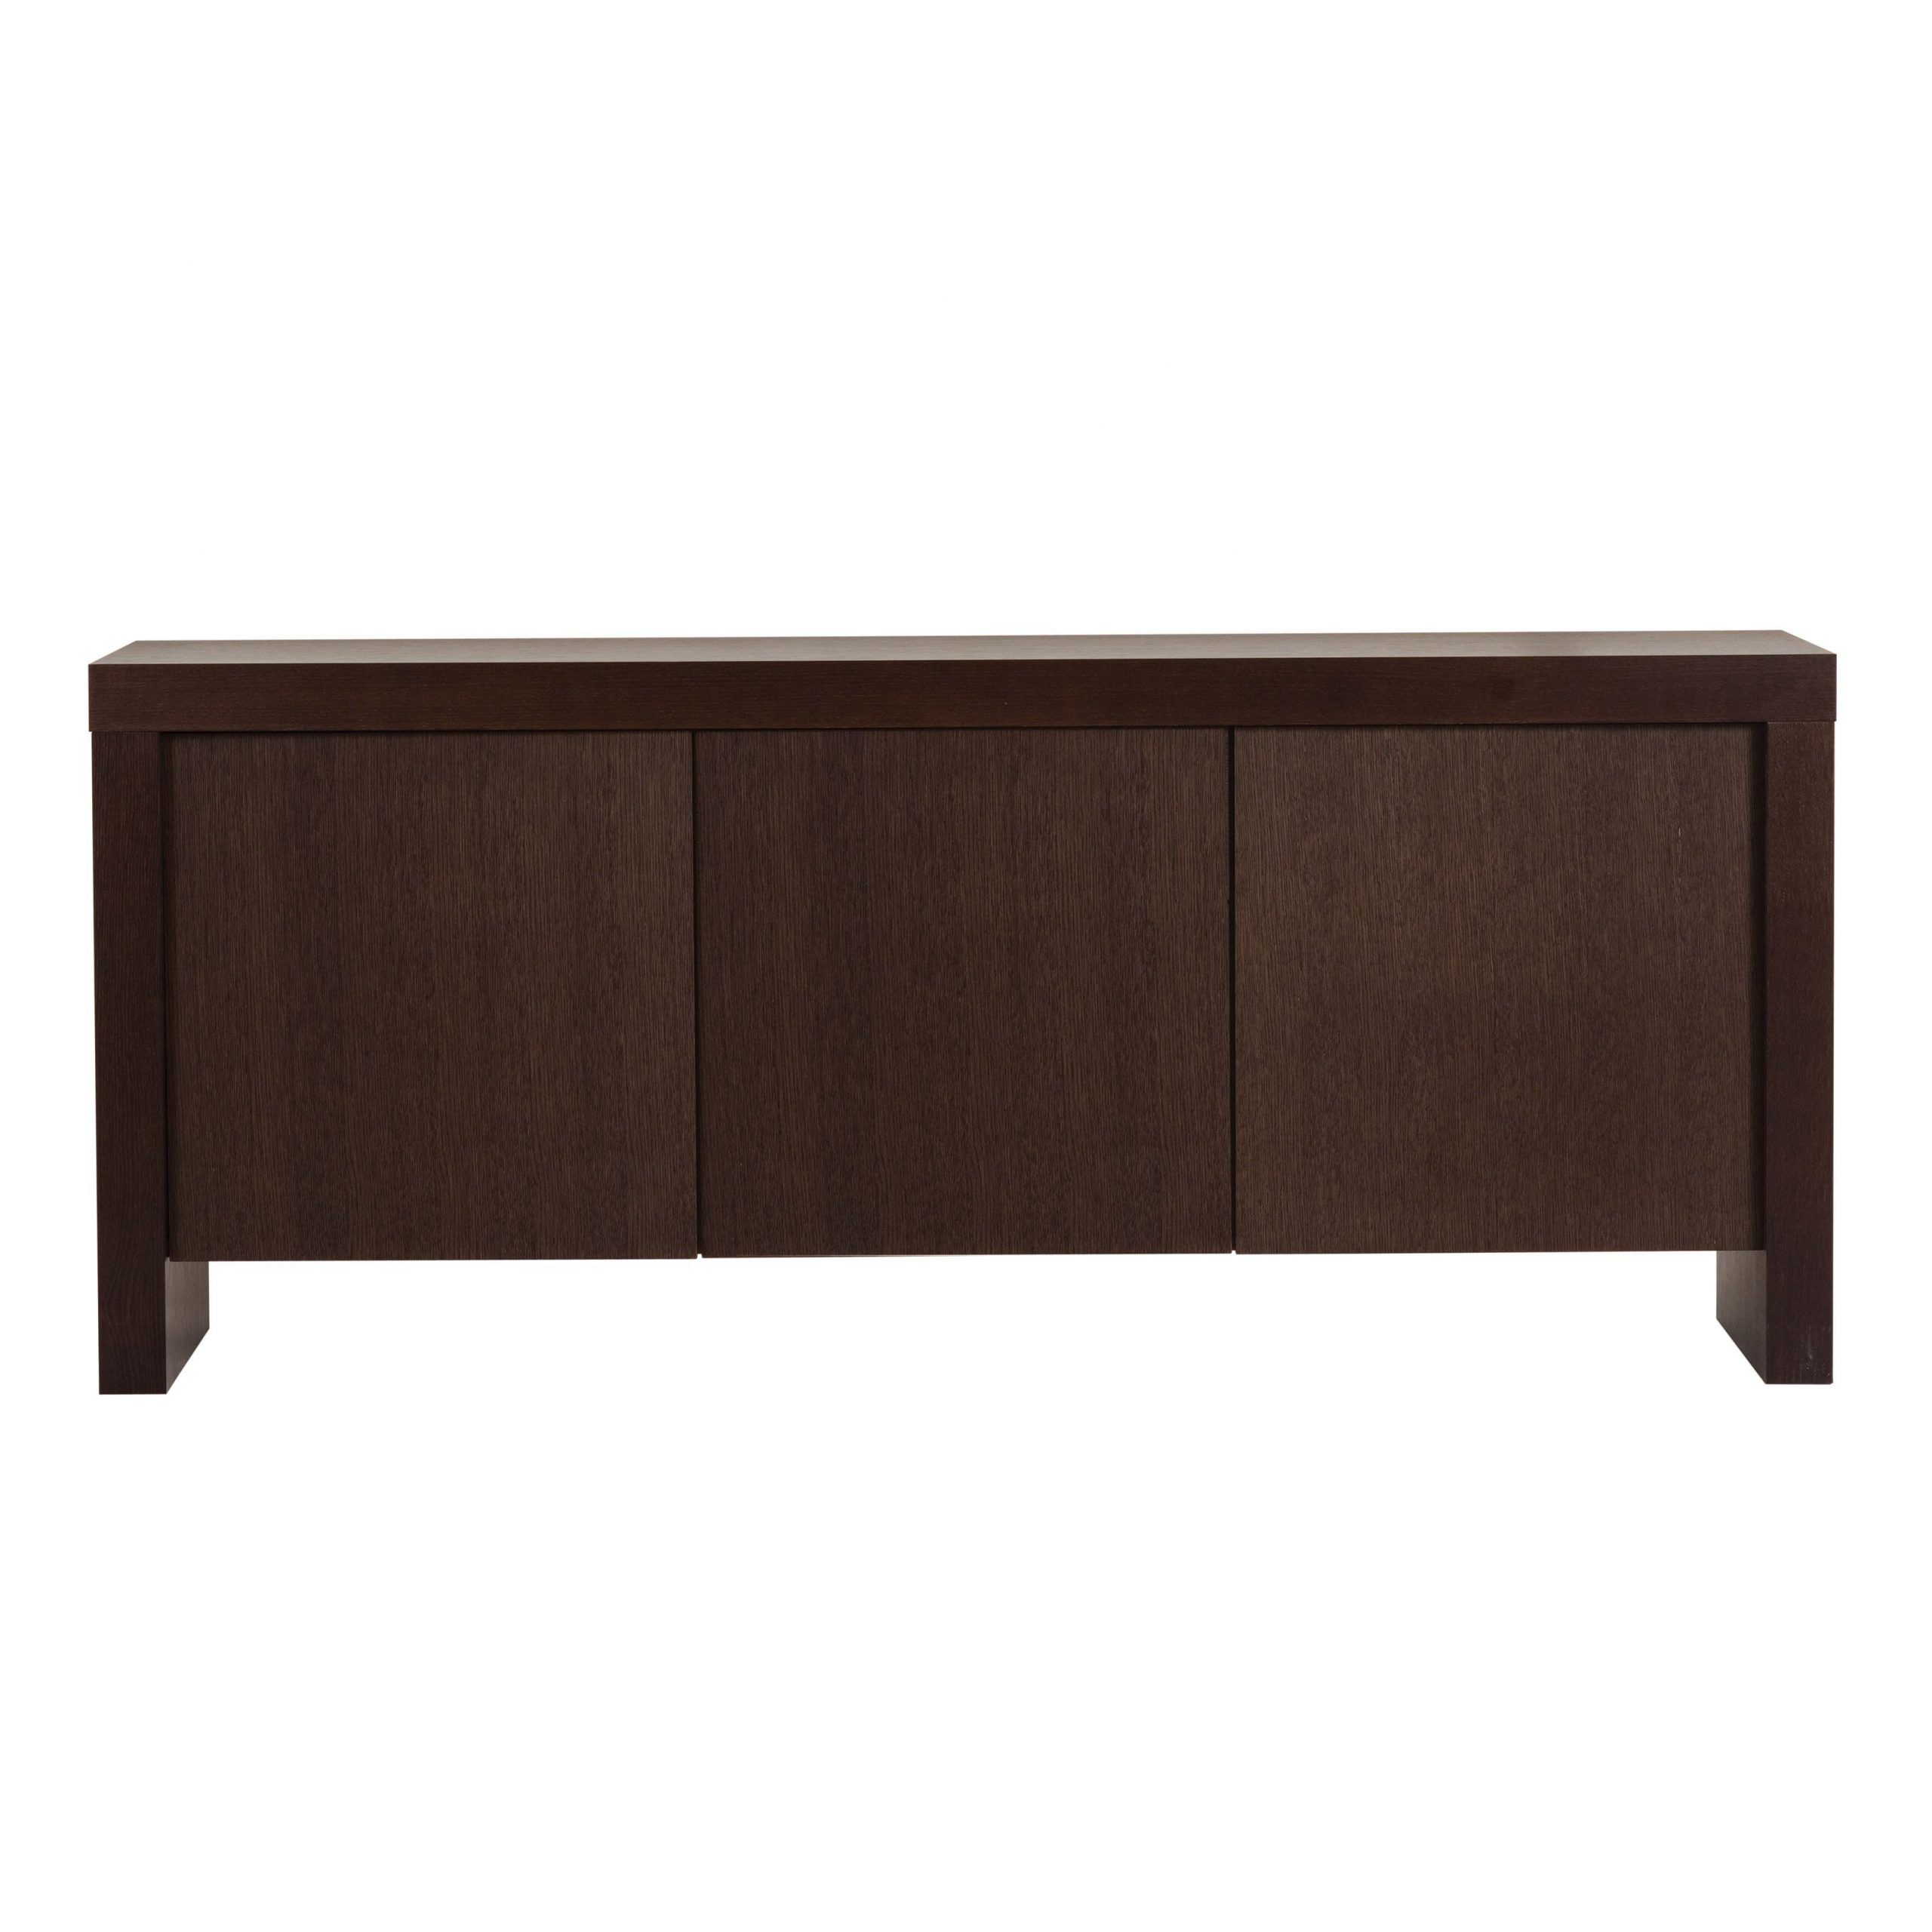 Kobe 3 Door Sideboard In Chocolatetemahome | Stylish With Benghauser 63" Wide Sideboards (View 9 of 15)